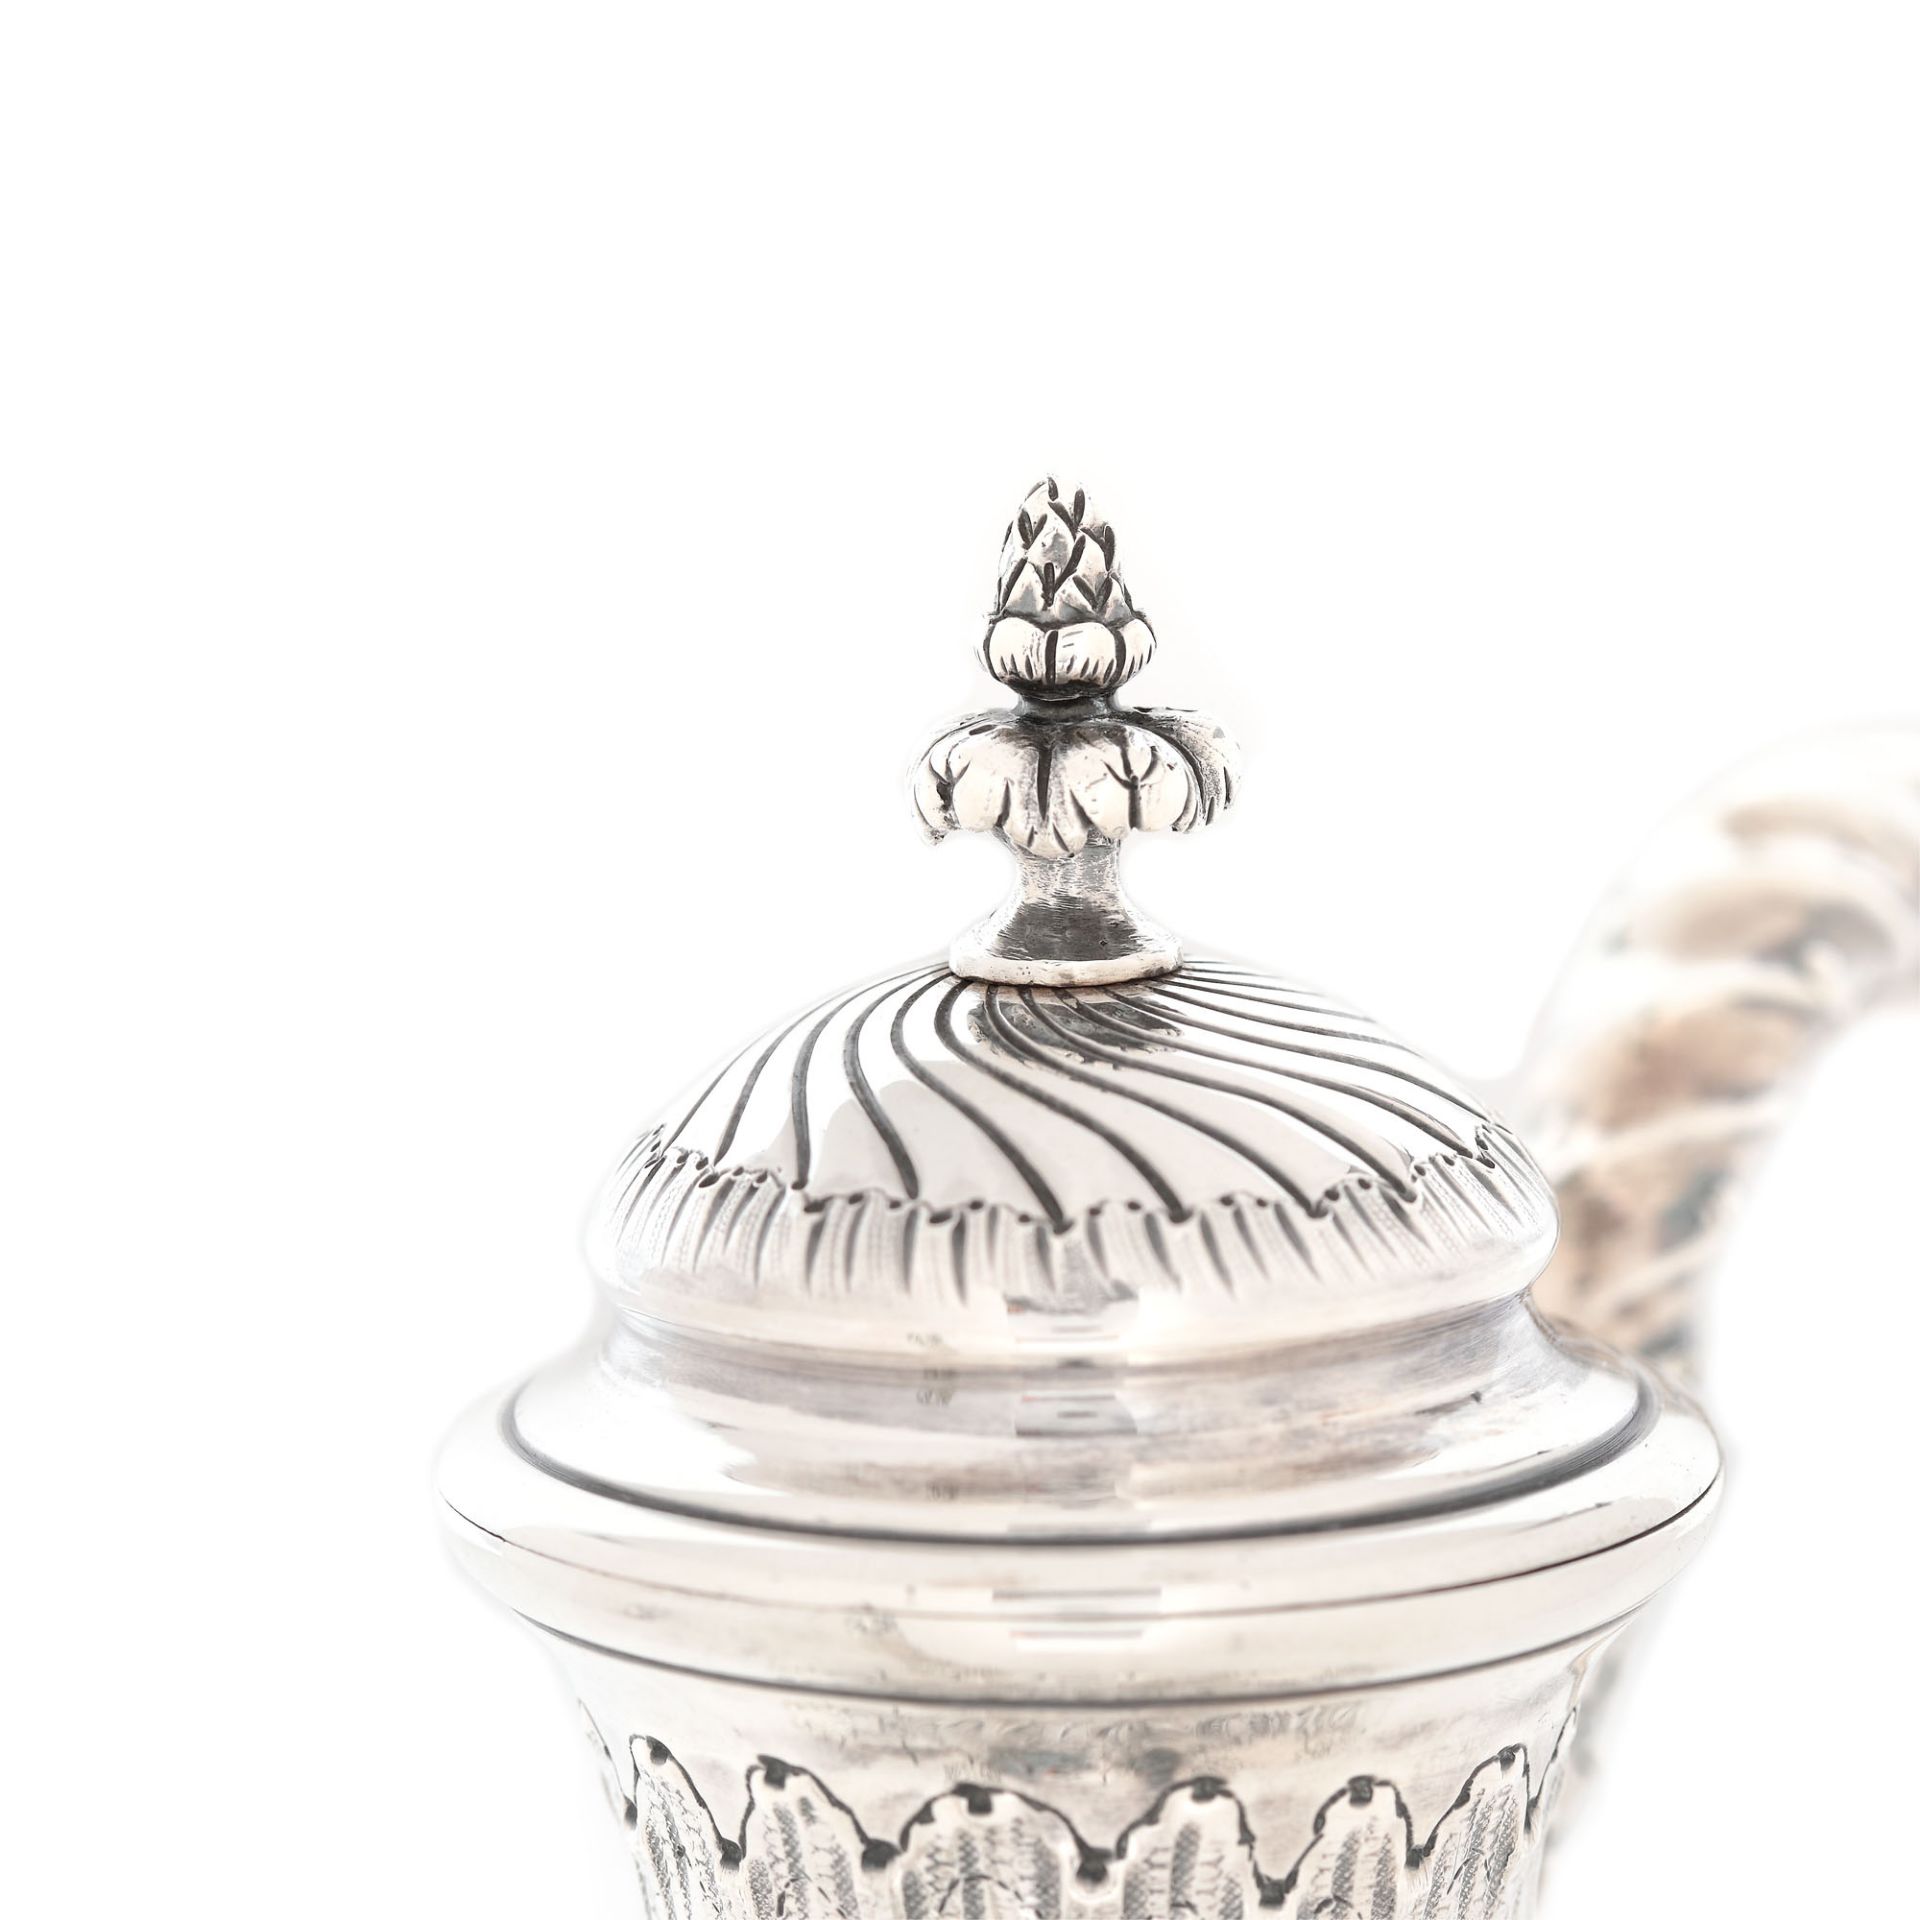 French workshop, Orientalist-inspired Risler & Carre silver teapot, approx. 1900 - Image 3 of 5